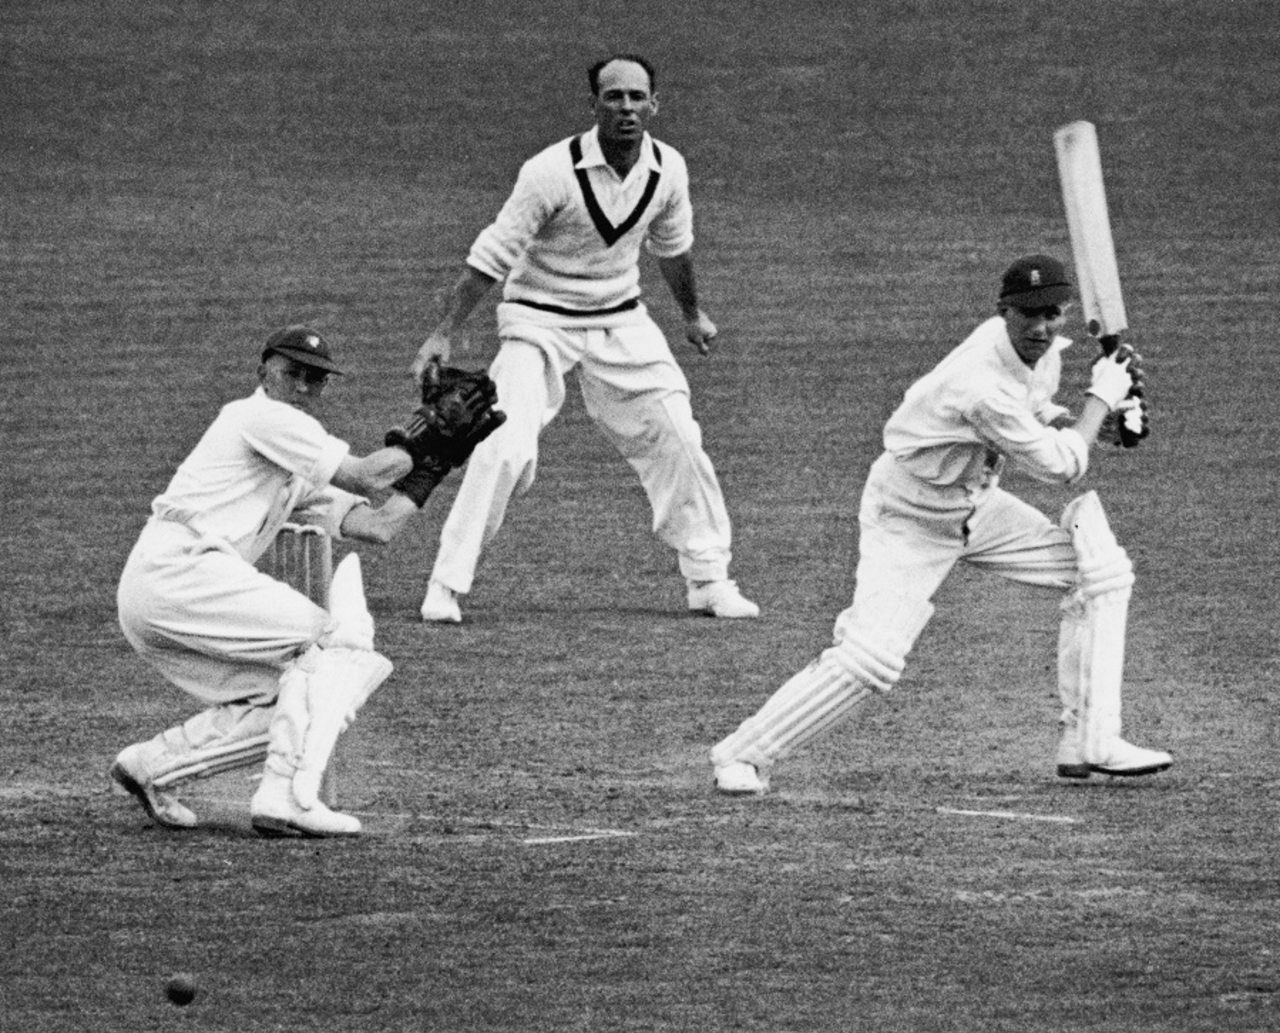 With 1521 Test runs at the venue, Len Hutton was well accustomed to lording it at The Oval&nbsp;&nbsp;&bull;&nbsp;&nbsp;The Cricketer International